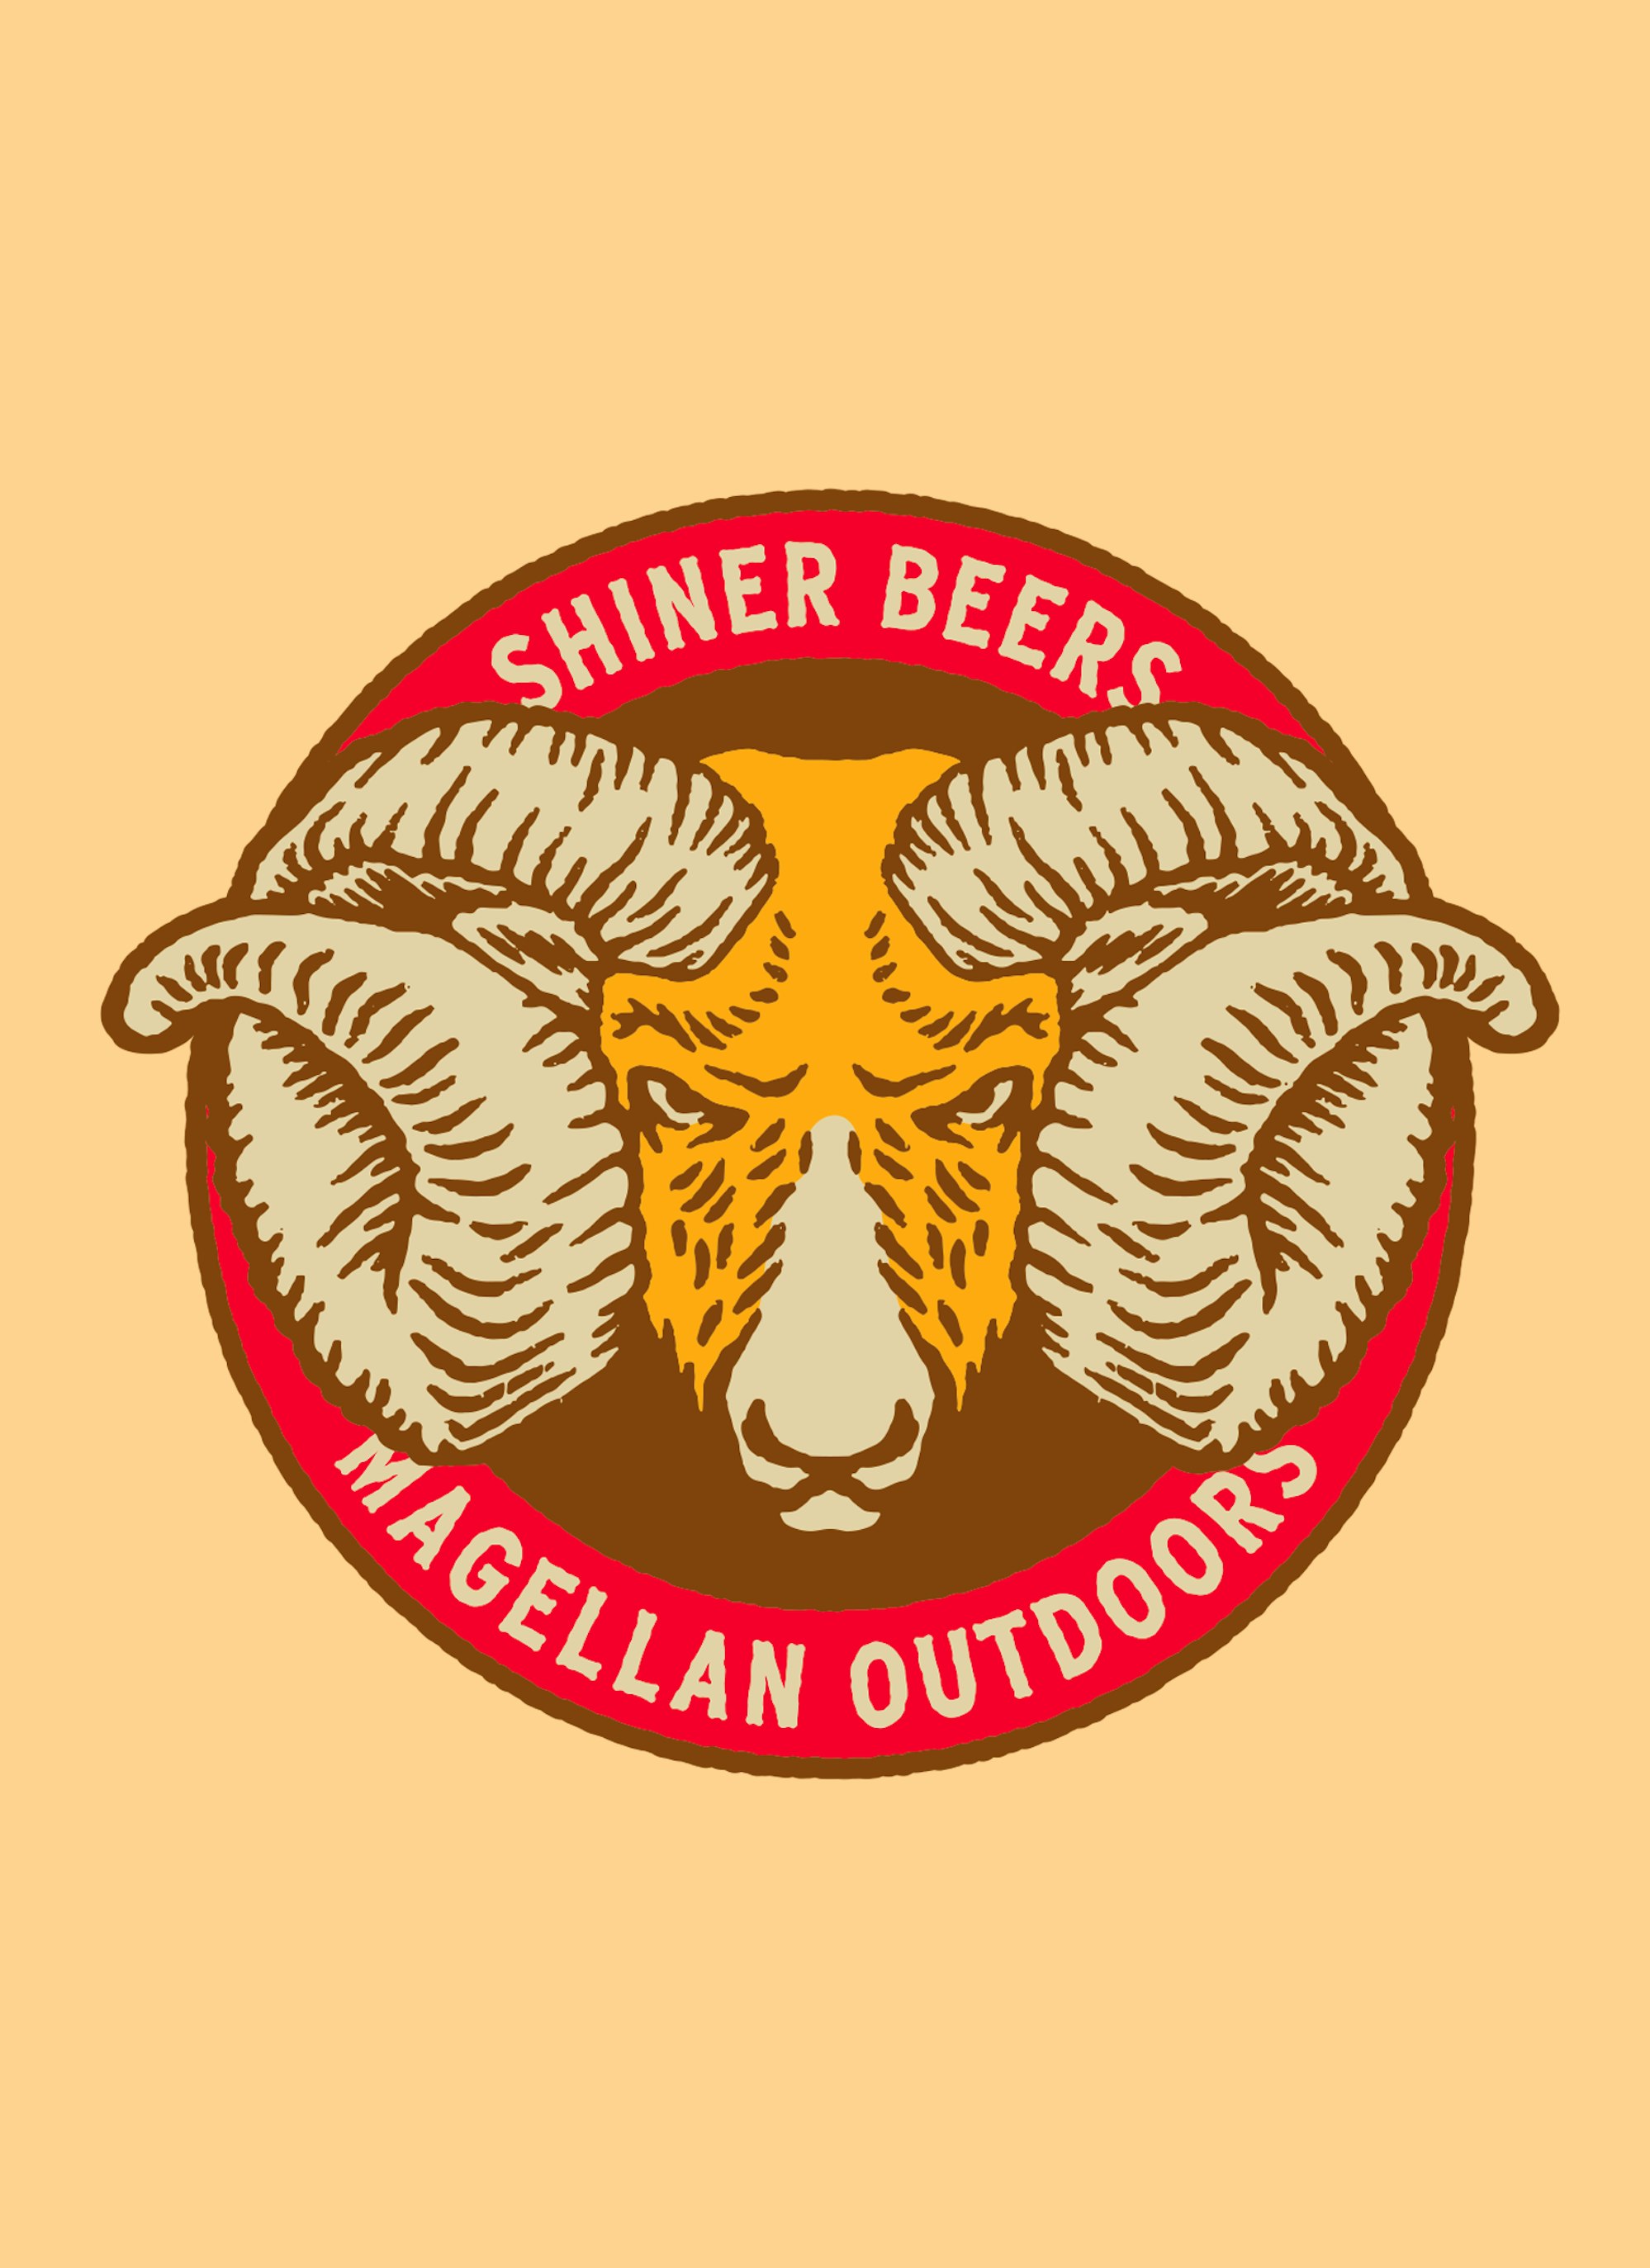 Shiner, Magellan Outdoors and Academy are well-dressed for the